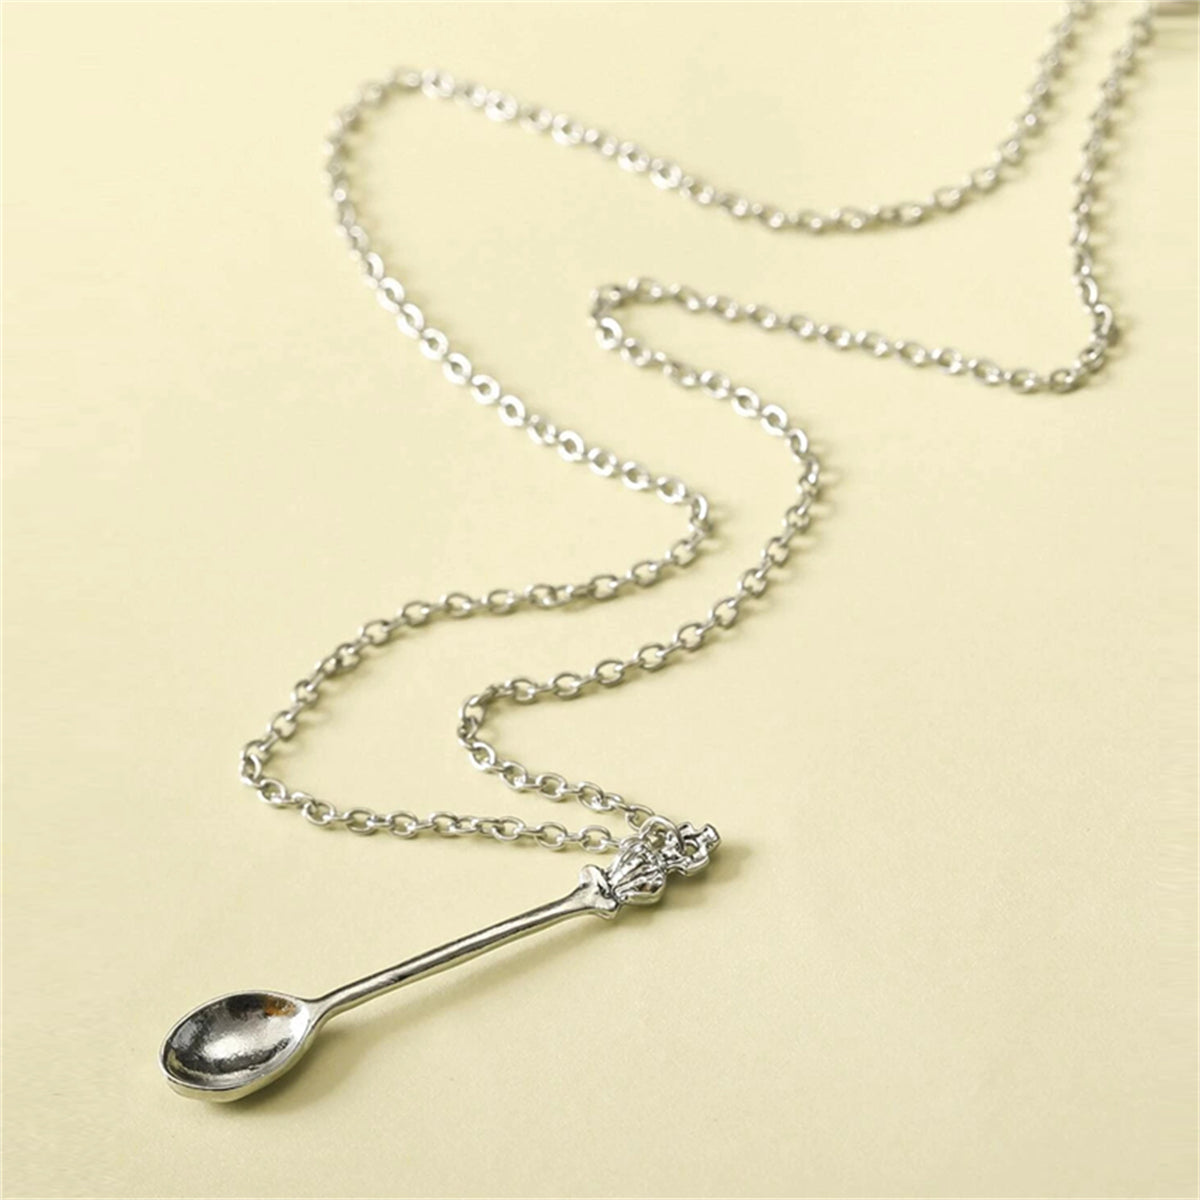 Silver-Plated Spoon Pendant Necklace